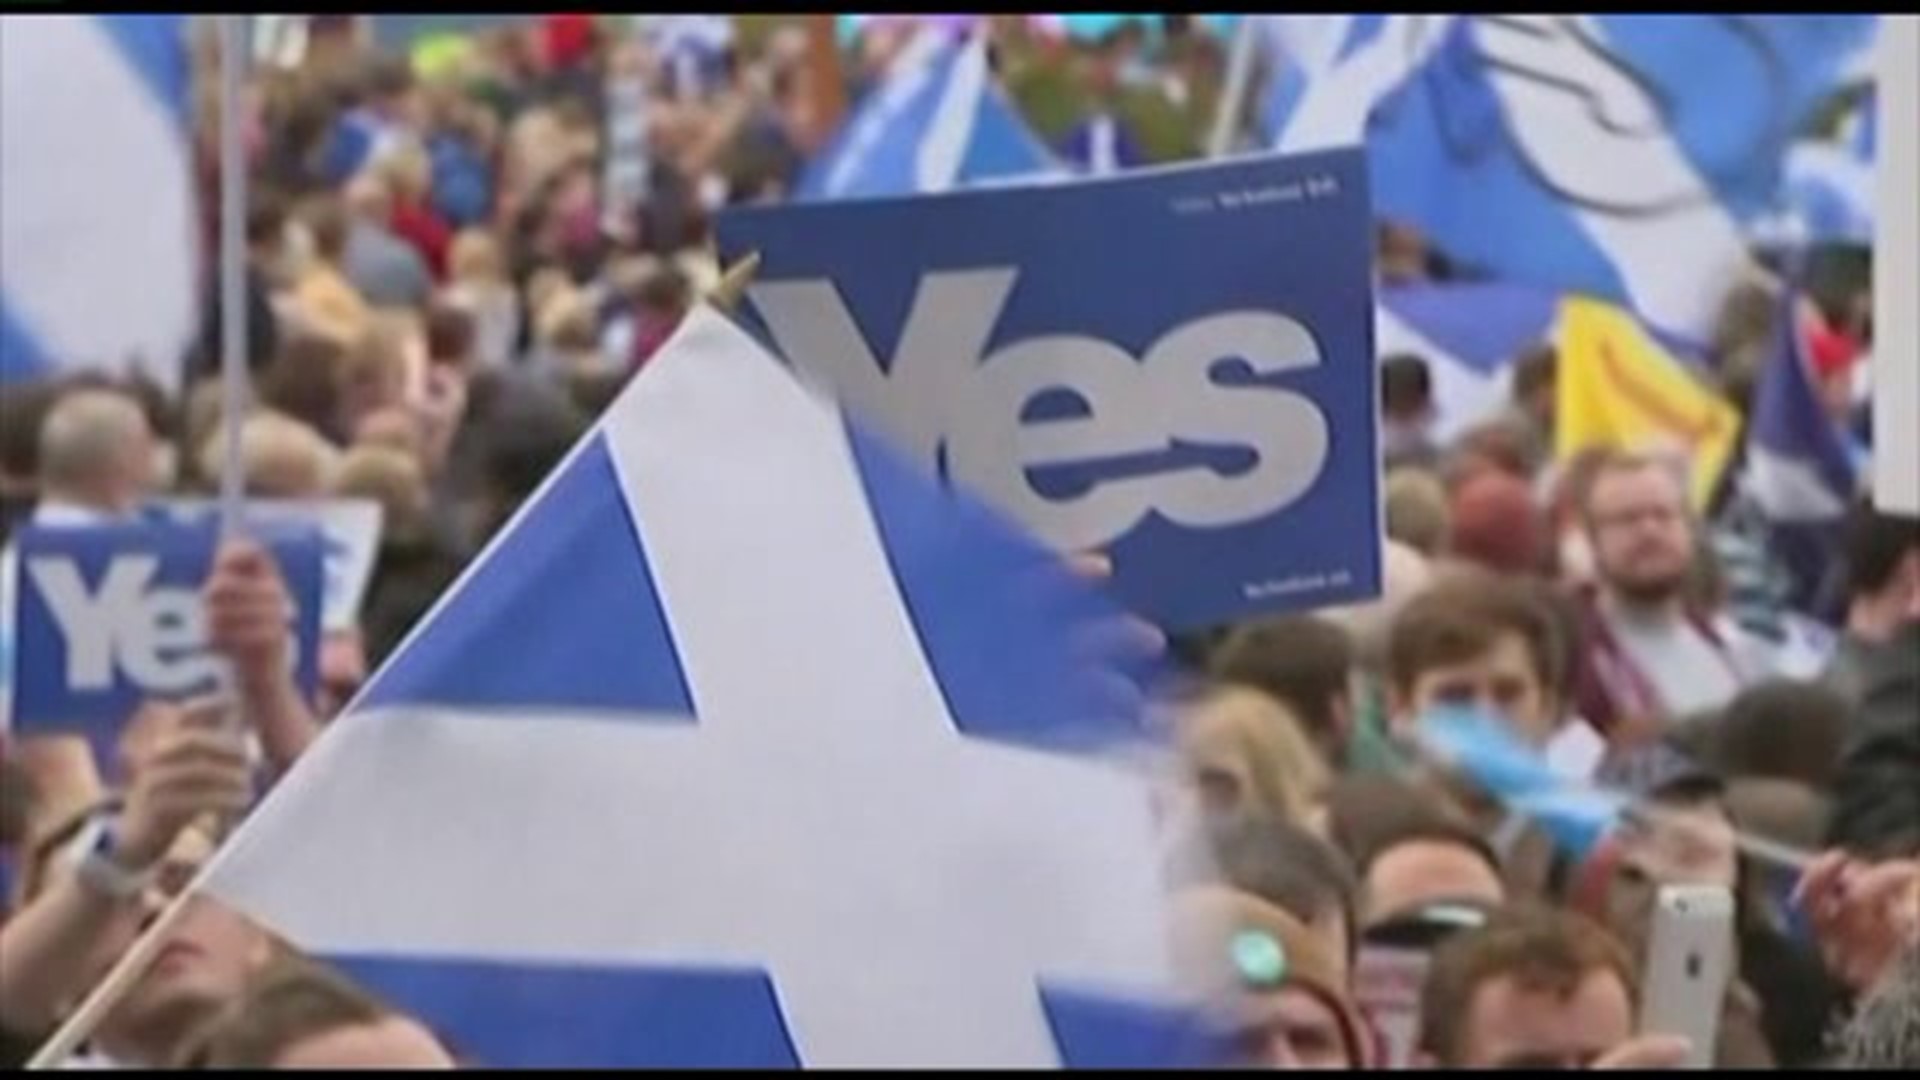 Locals React To Possible Scottish Independence